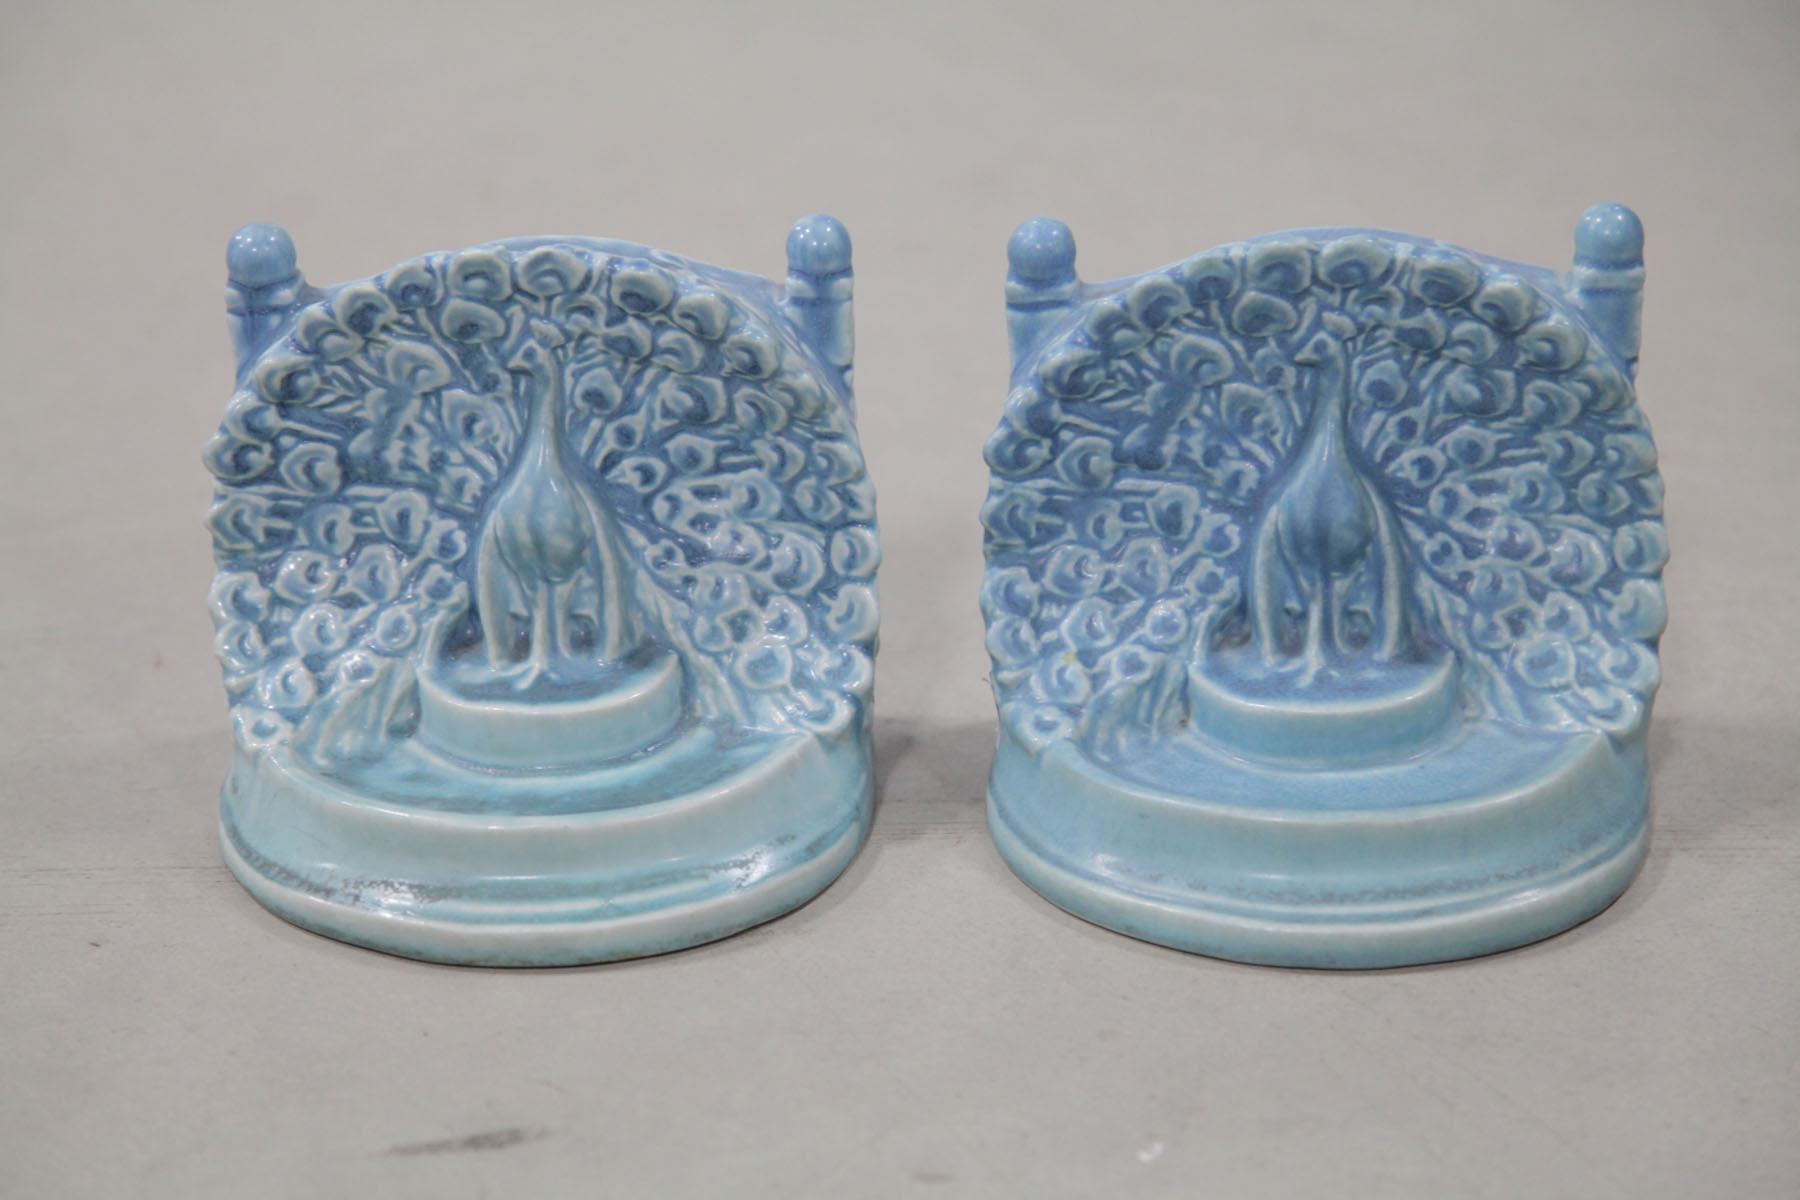 PAIR OF ROOKWOOD BOOKENDS Ohio 122d99